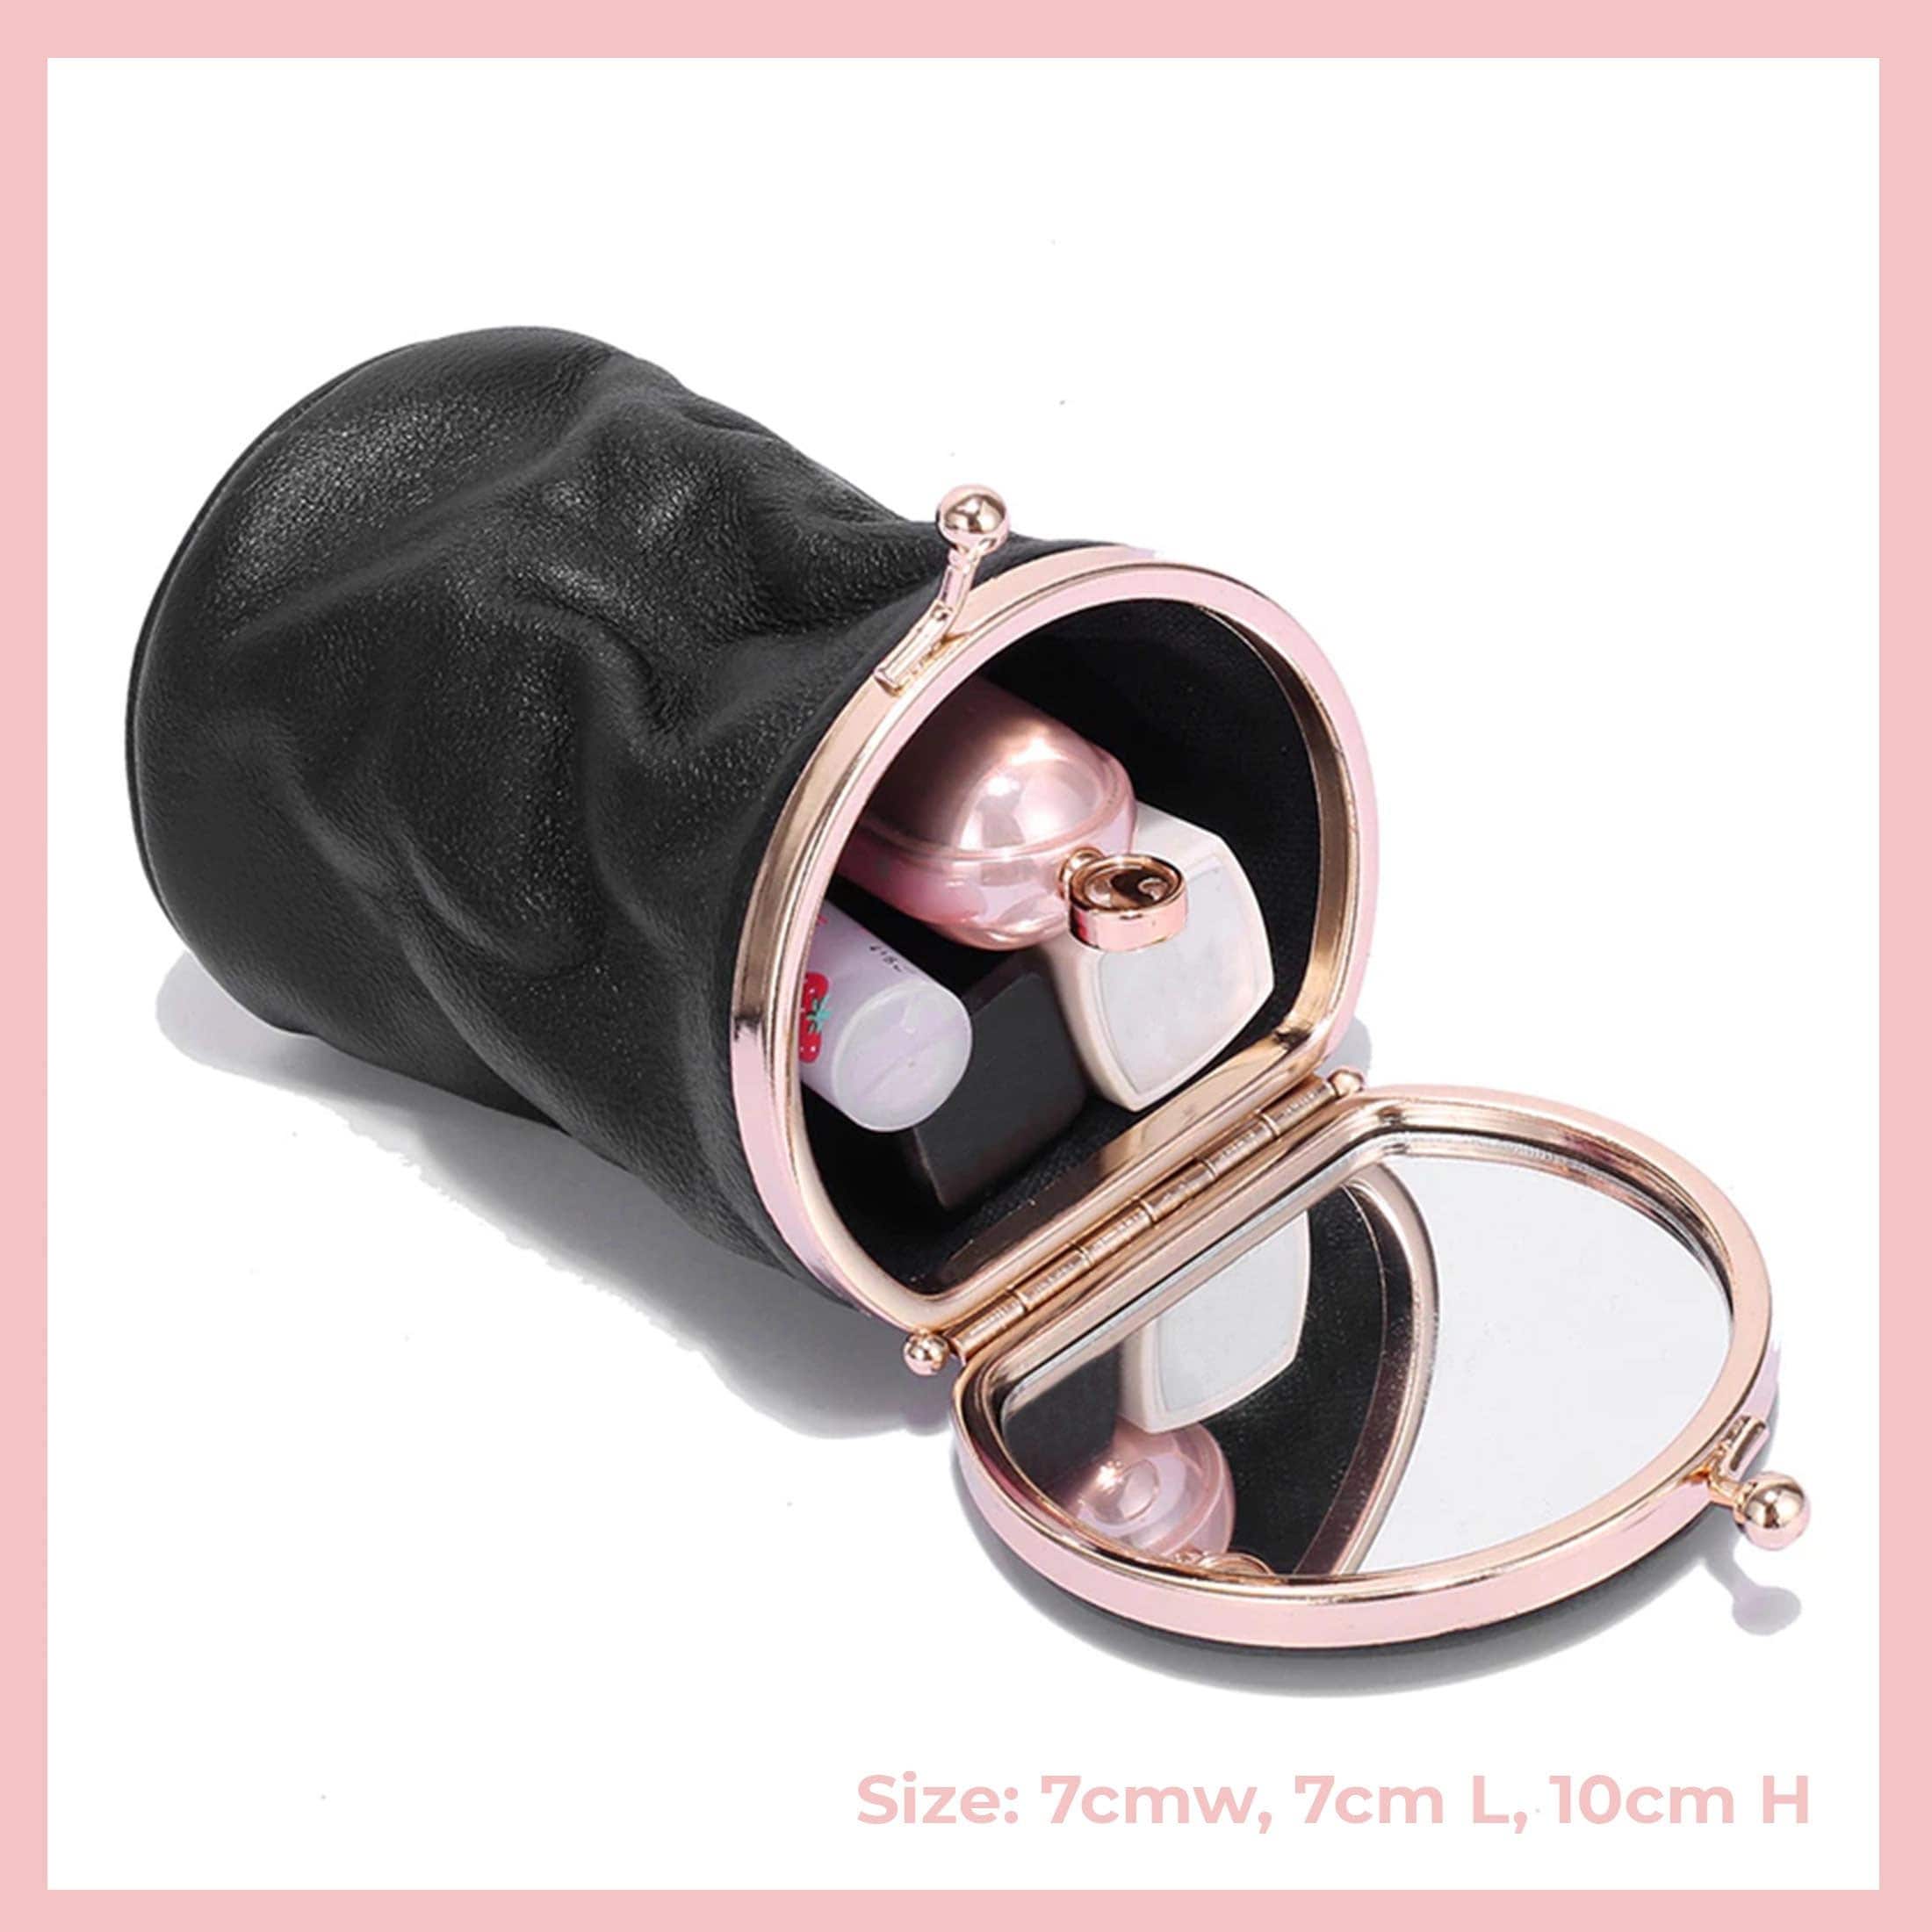 Find more Faux Louis Vuitton Lipstick Holder for sale at up to 90% off